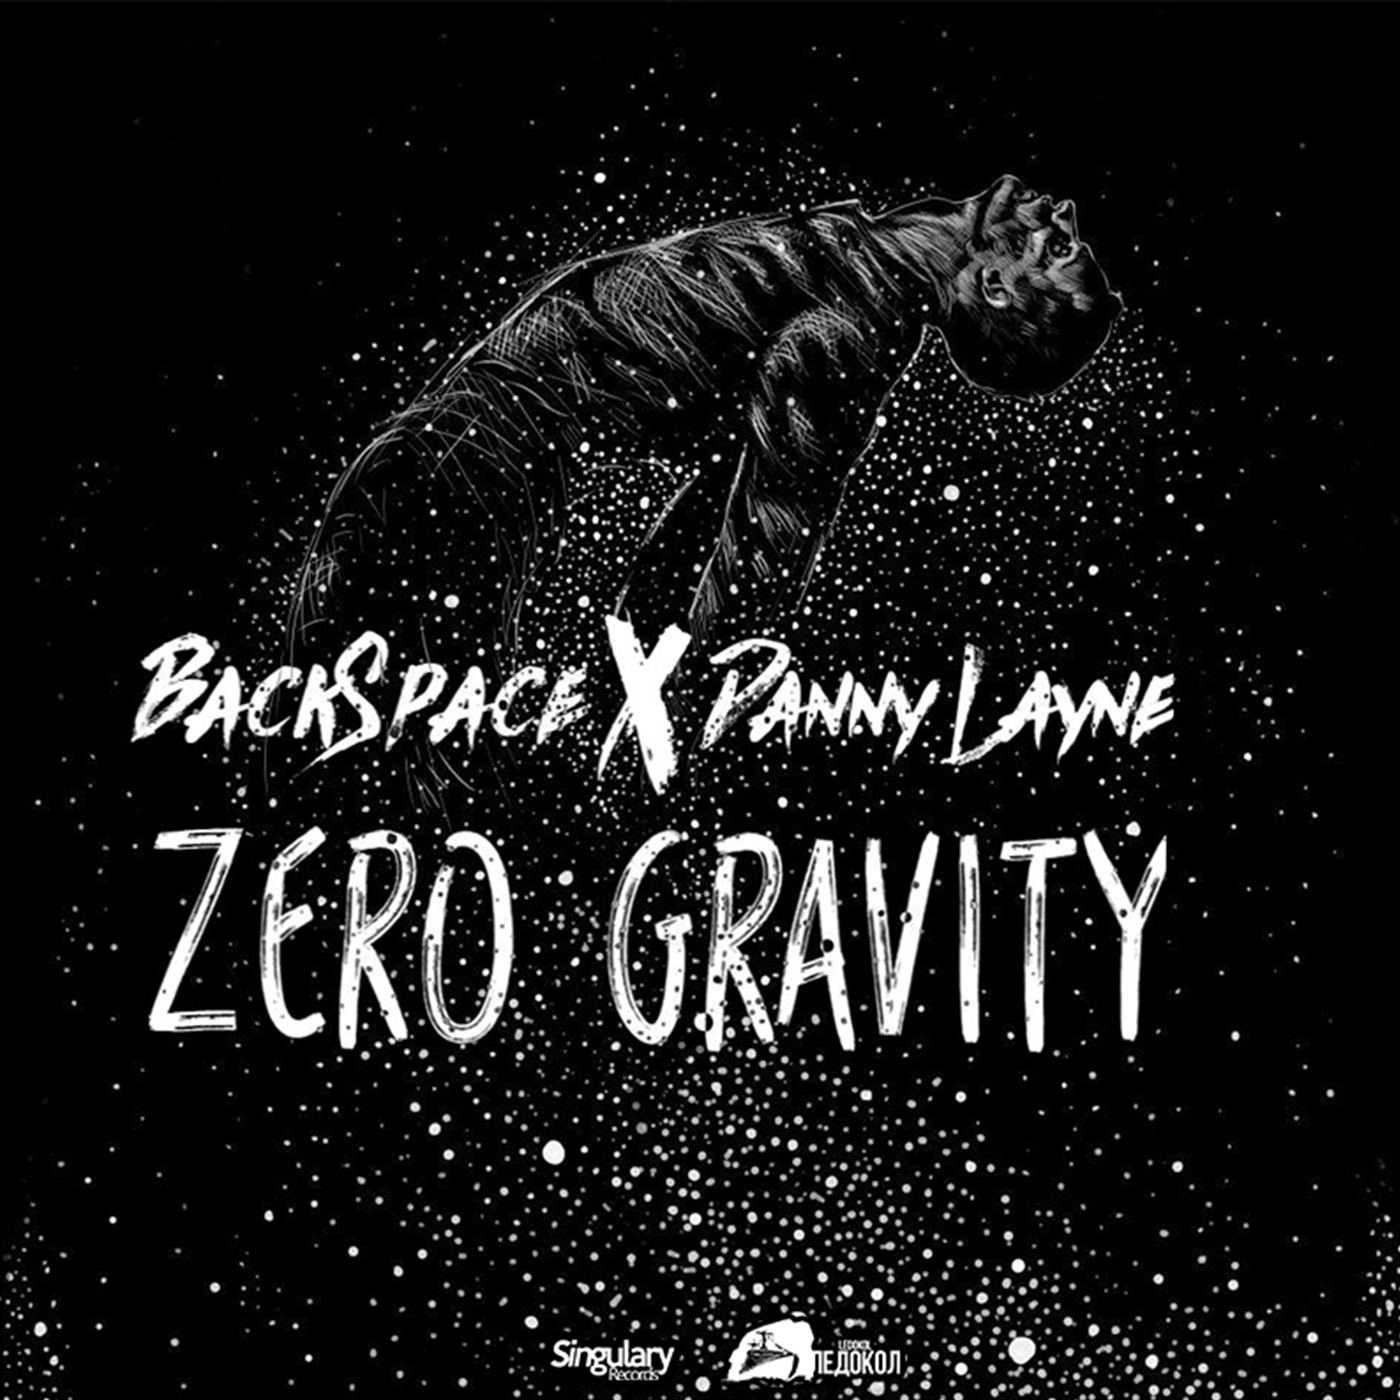 Back To Earth (Feat. Danny Layne)